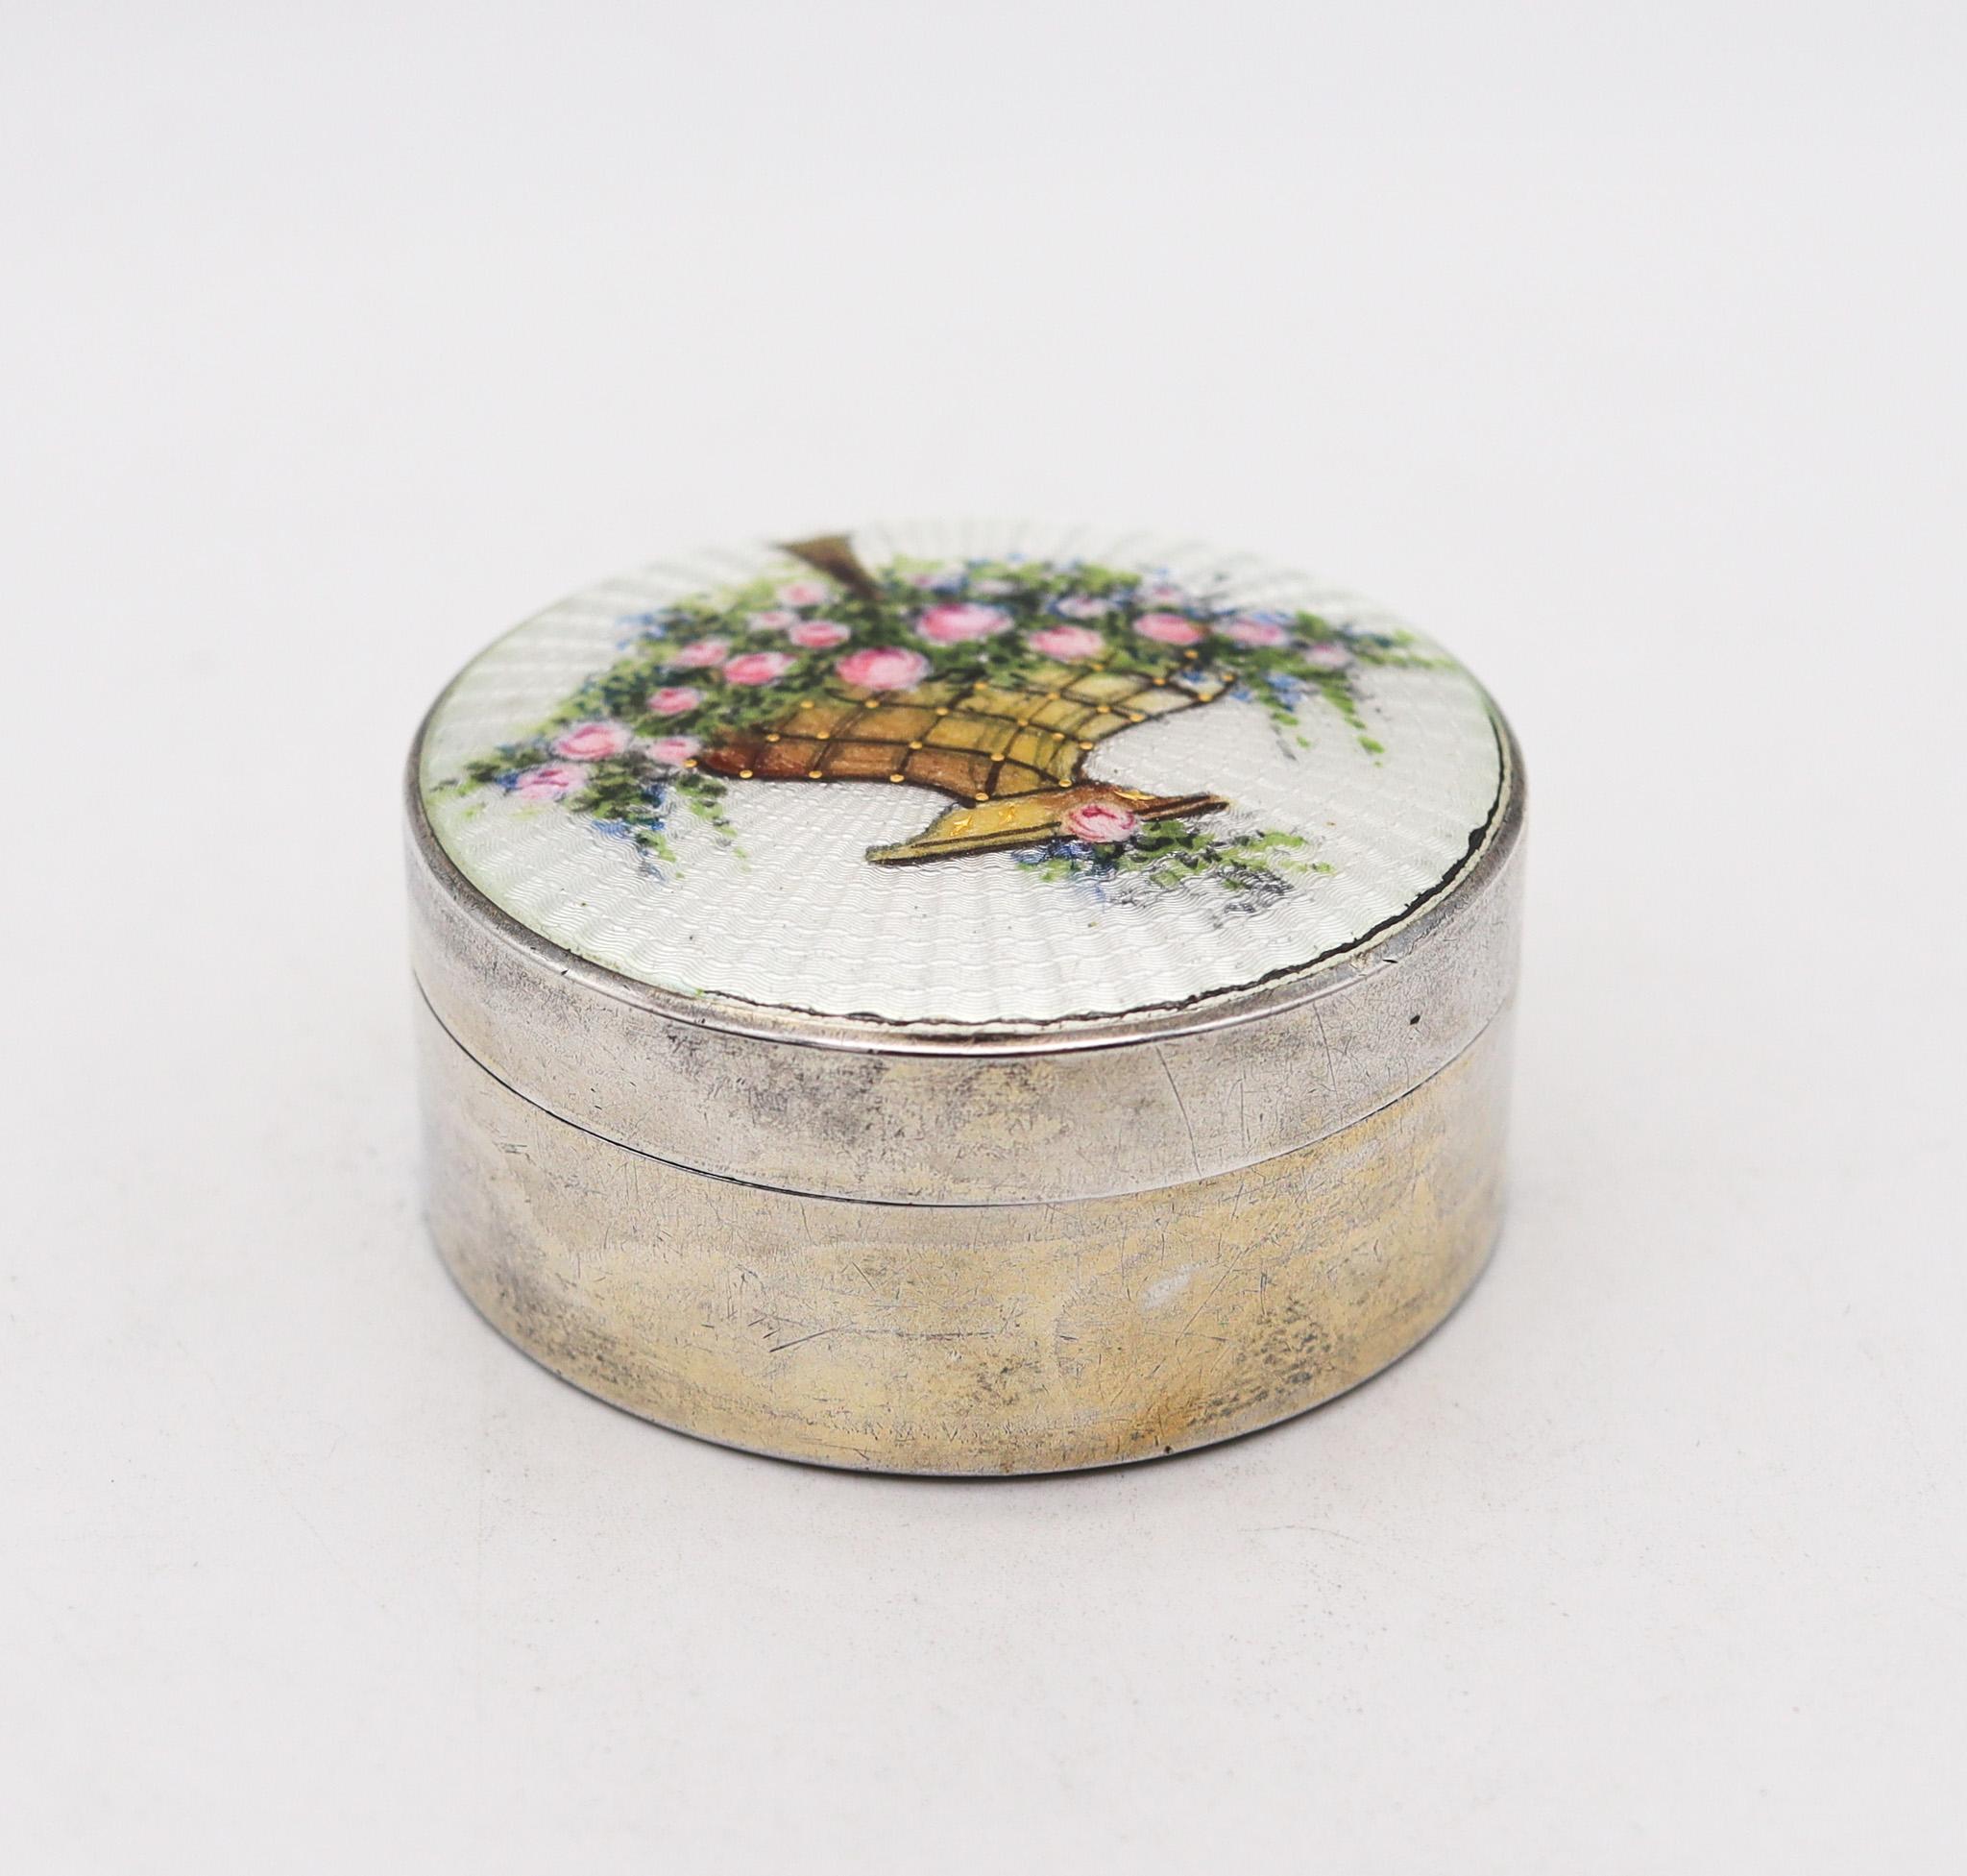 A guilloche enameled round box designed by R. Blackinton.

Beautiful early 20th century enamel box, created by the Ross Blackinton Company Silversmiths & Goldsmiths, circa 1910. This beautiful Edwardian box was carefully crafted with impeccable